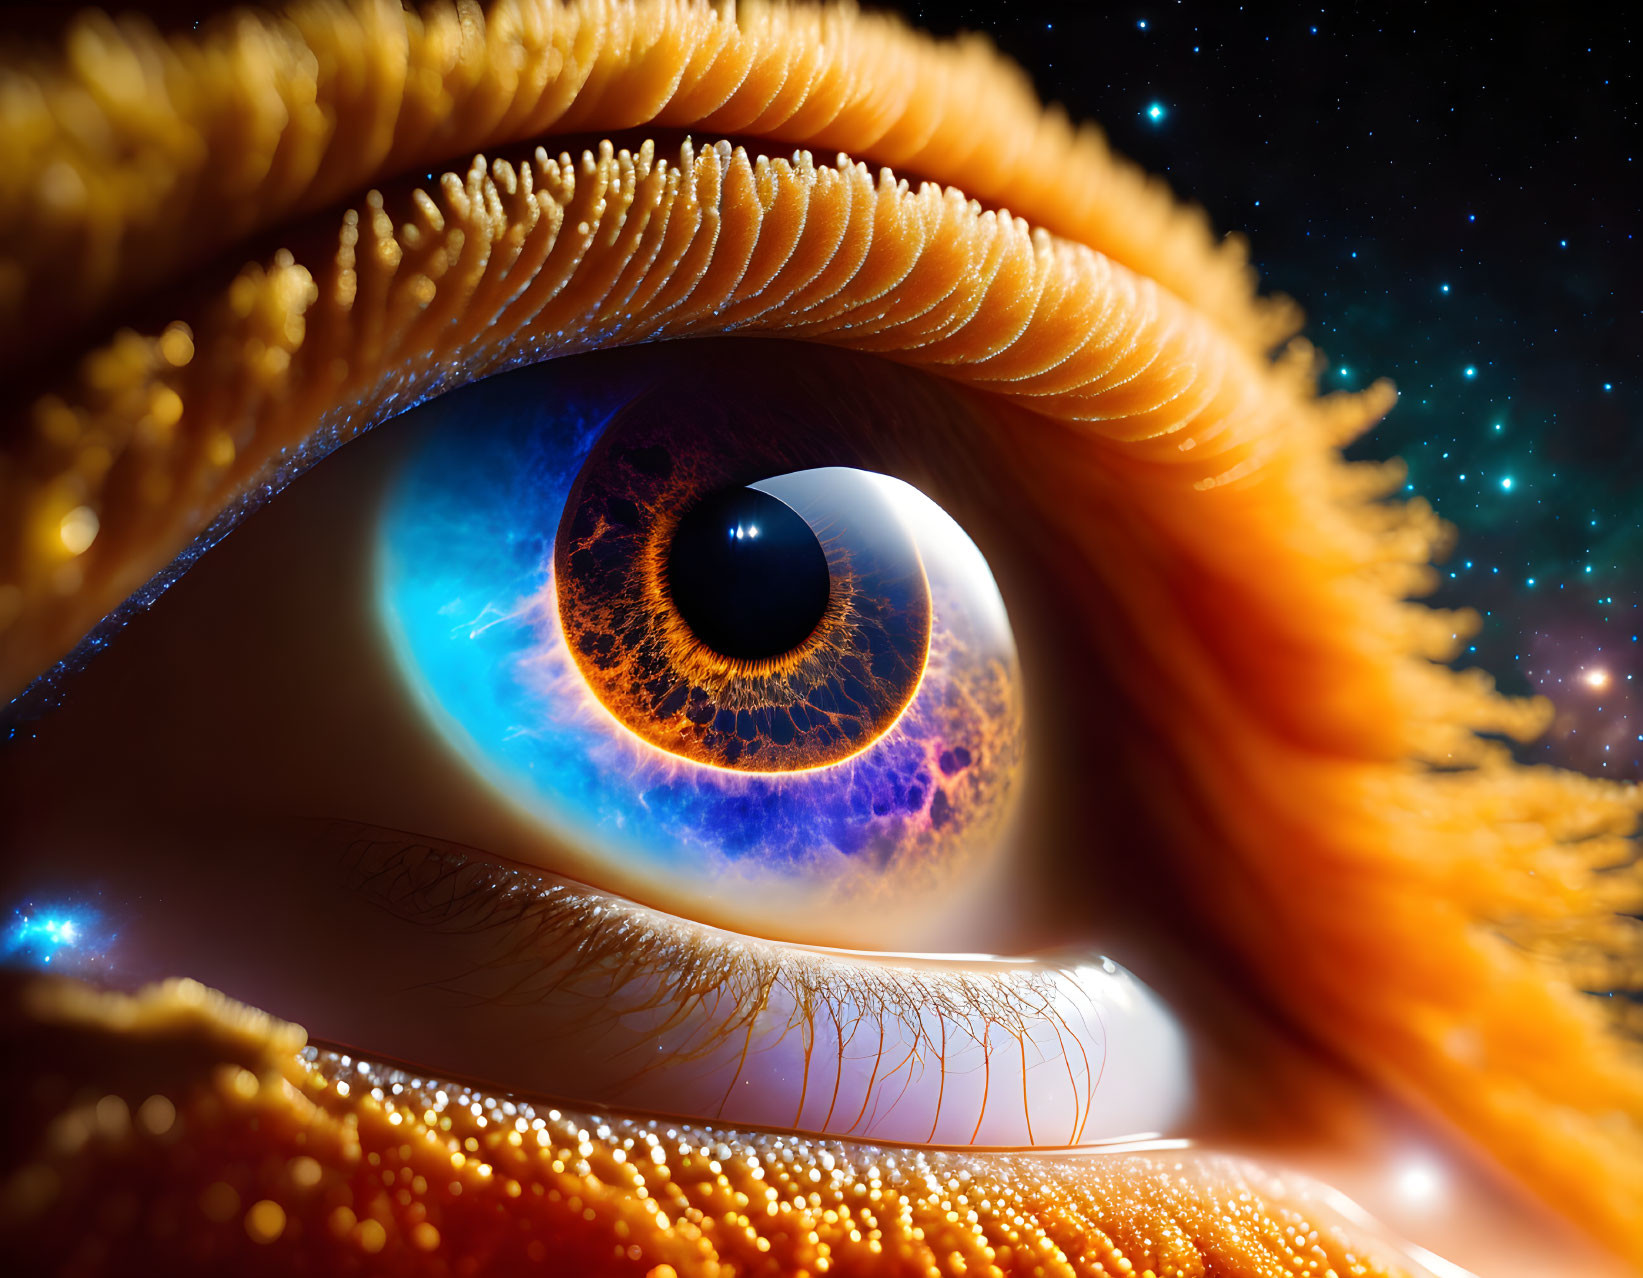 Detailed close-up of human eye reflecting cosmic starfield with fiery orange lashes and deep blue iris.